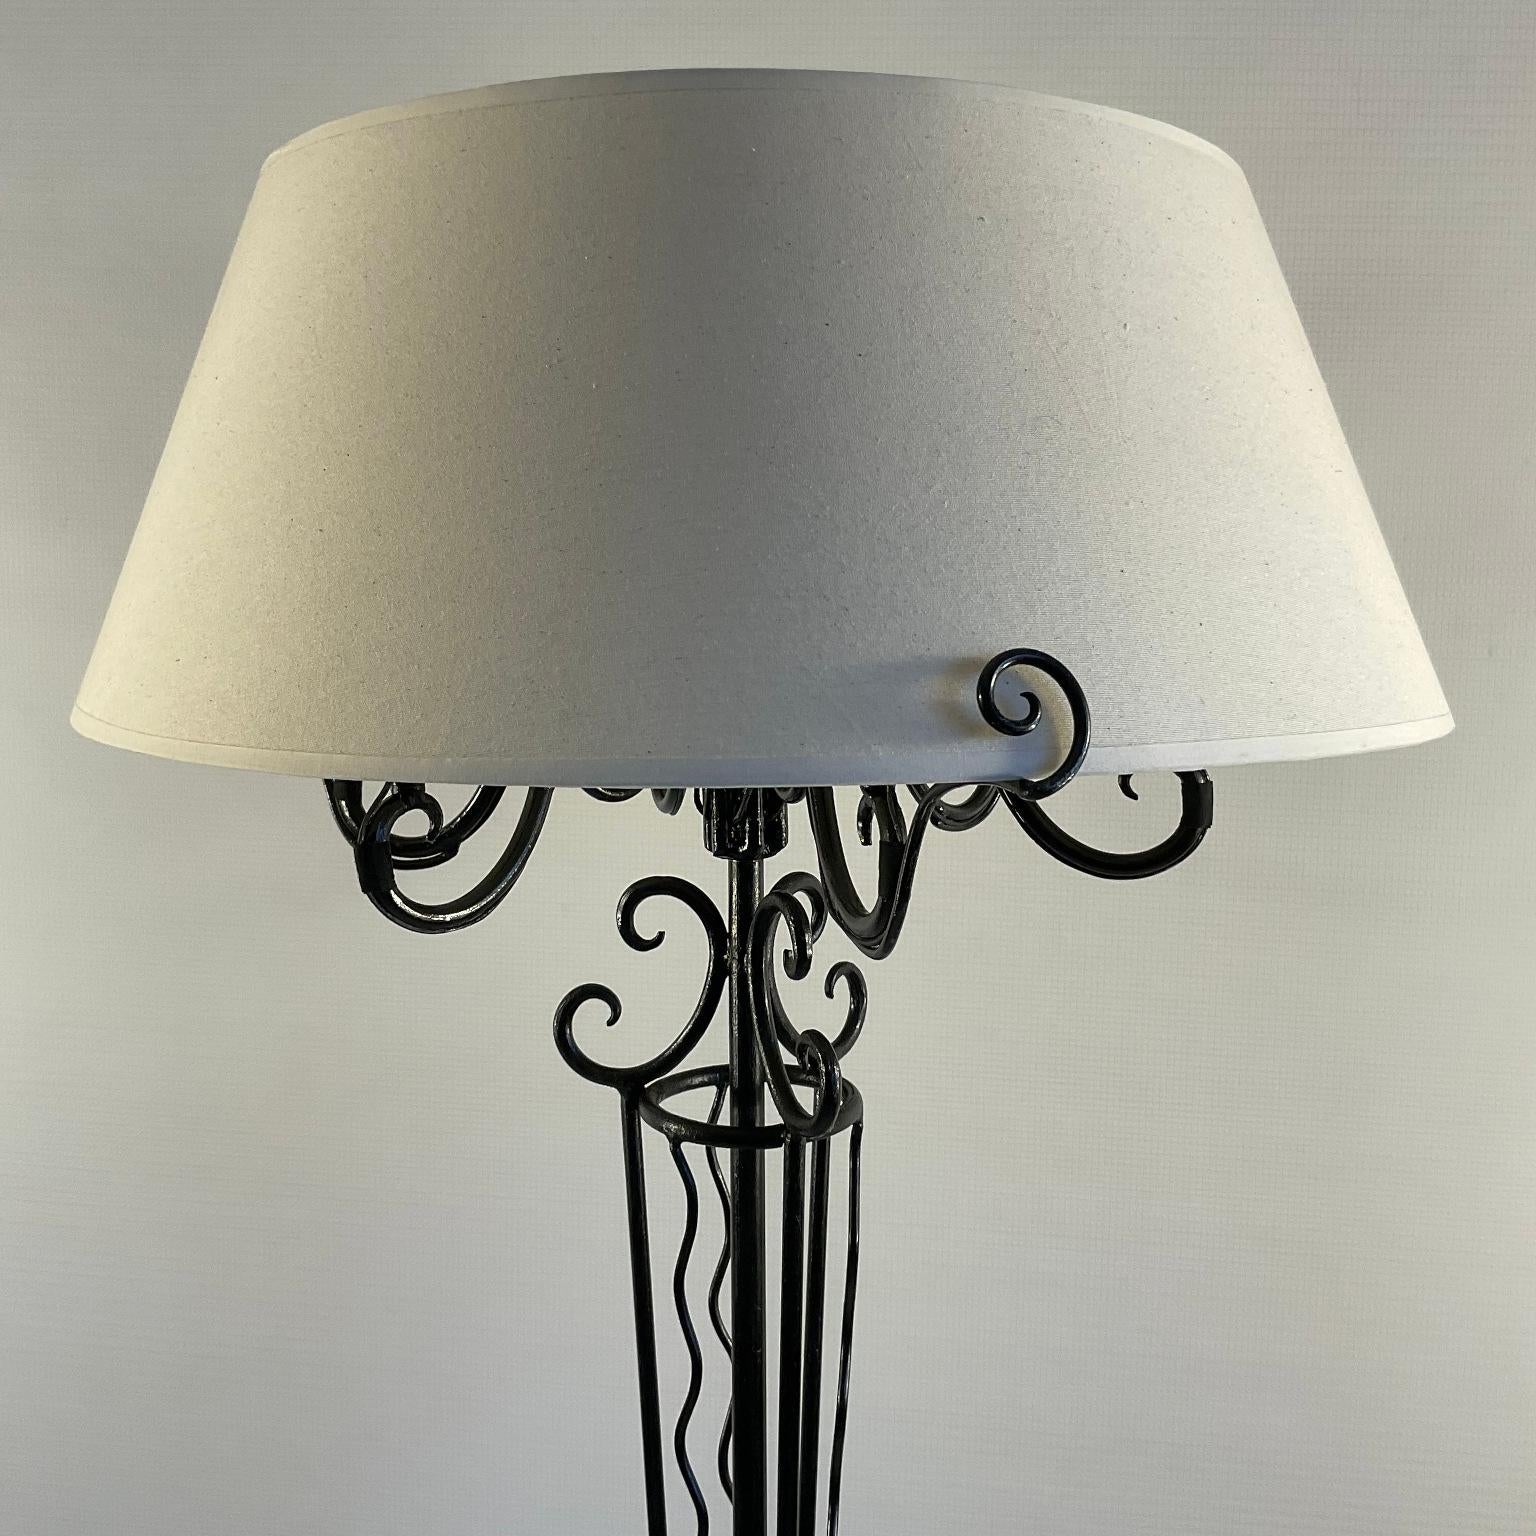 Art Deco wrought iron floor lamp from the 1920s in the style of René Prou, with its original lampshade redone in linen fabric.
Lampshade dimensions :
Top diameter/42cm
Bottom diameter/60cm
Height/24cm